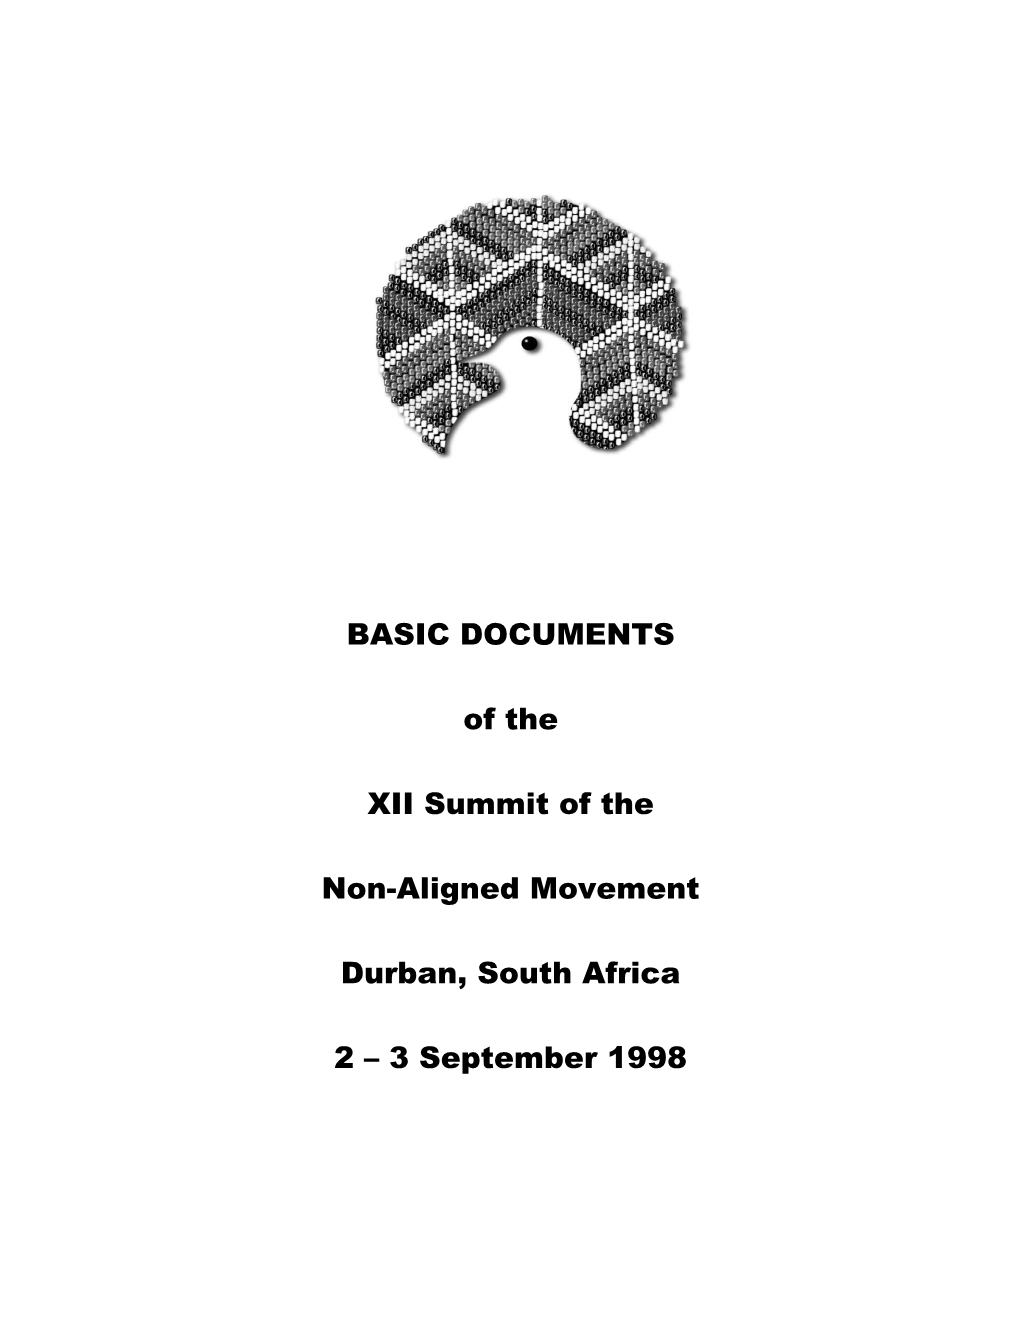 Vision 2001: Draft Document for Presentation by South Africa to 12Th Non-Aligned Movement